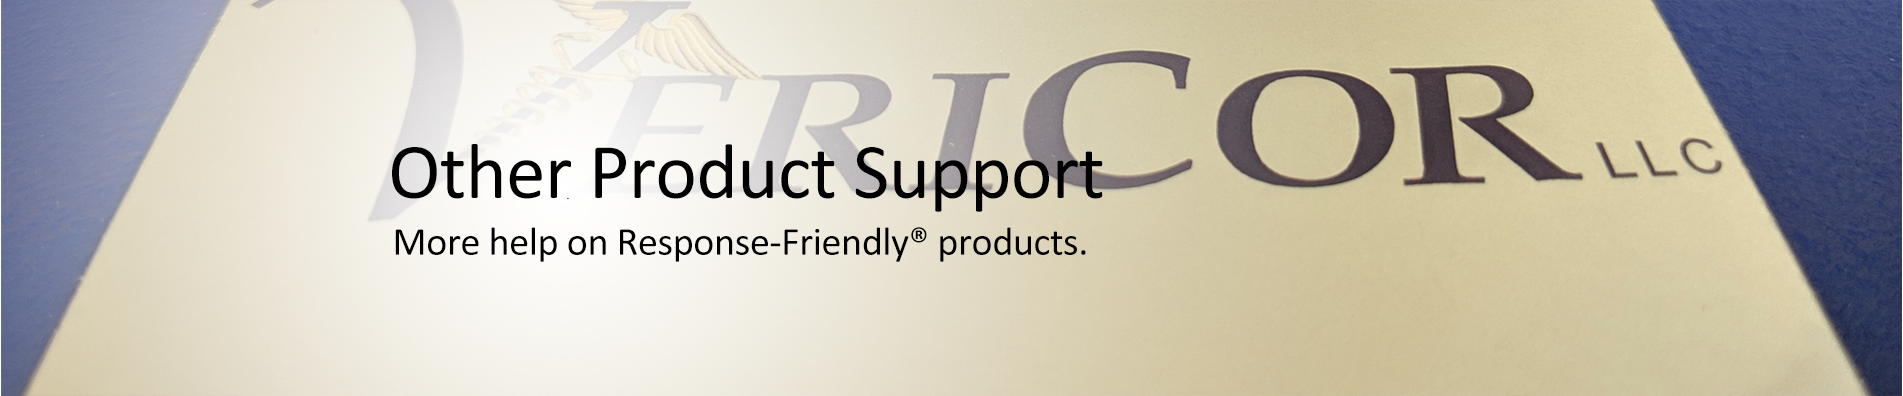 Other Product Support header